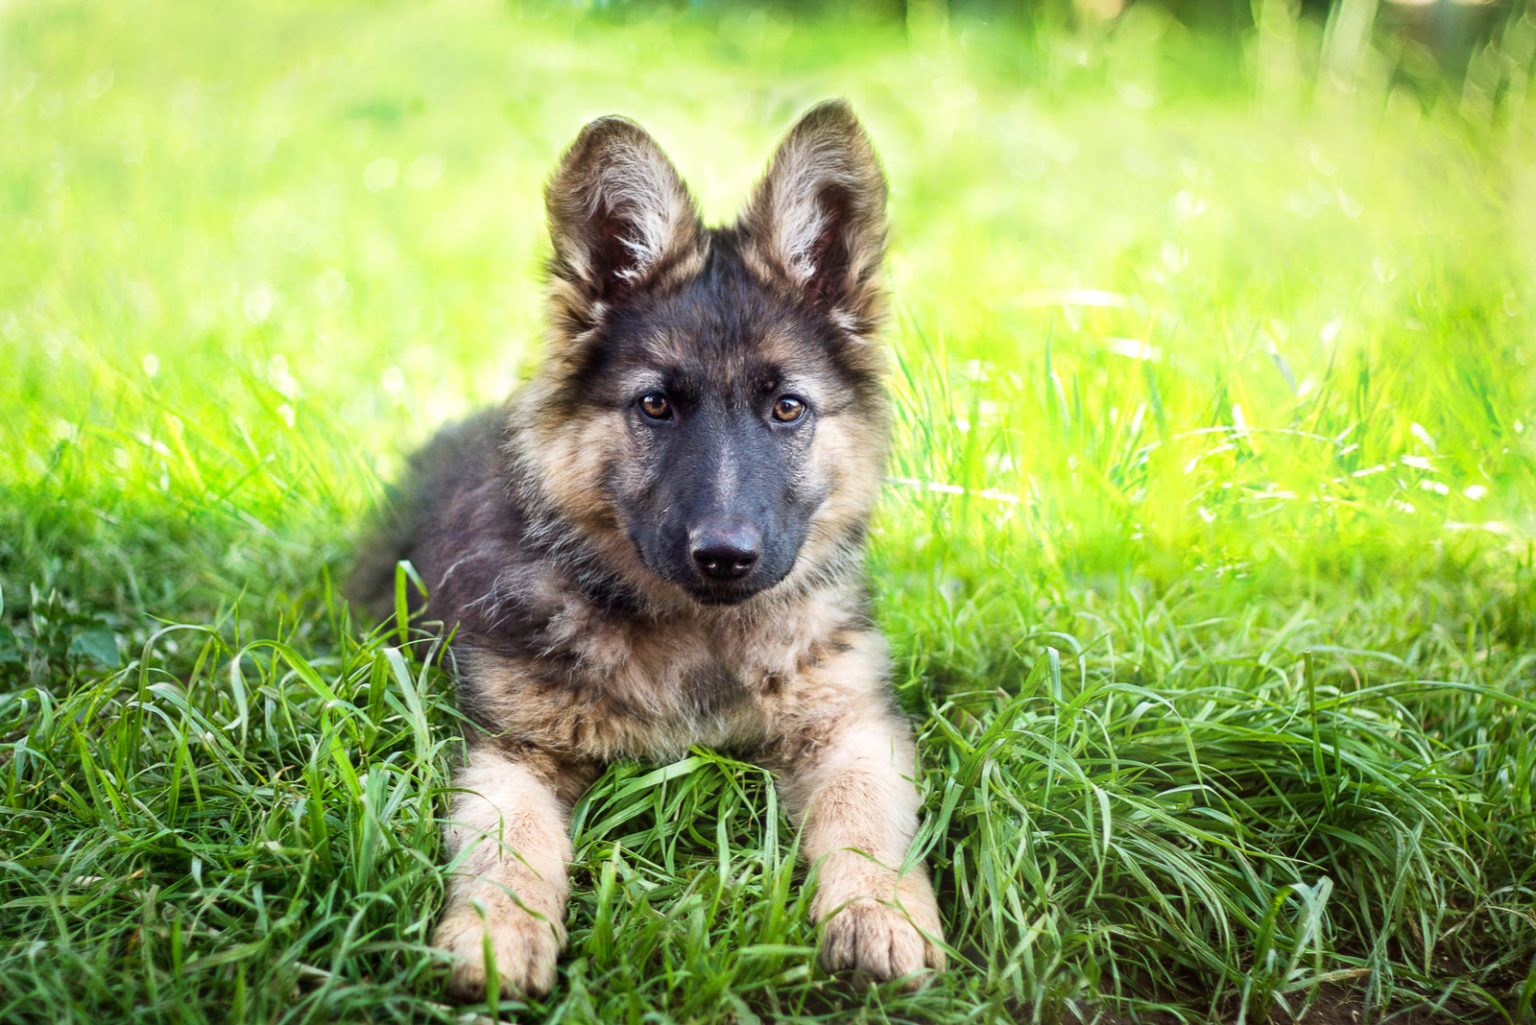 German Shepherd Price - Are These Dogs Expensive to Keep?